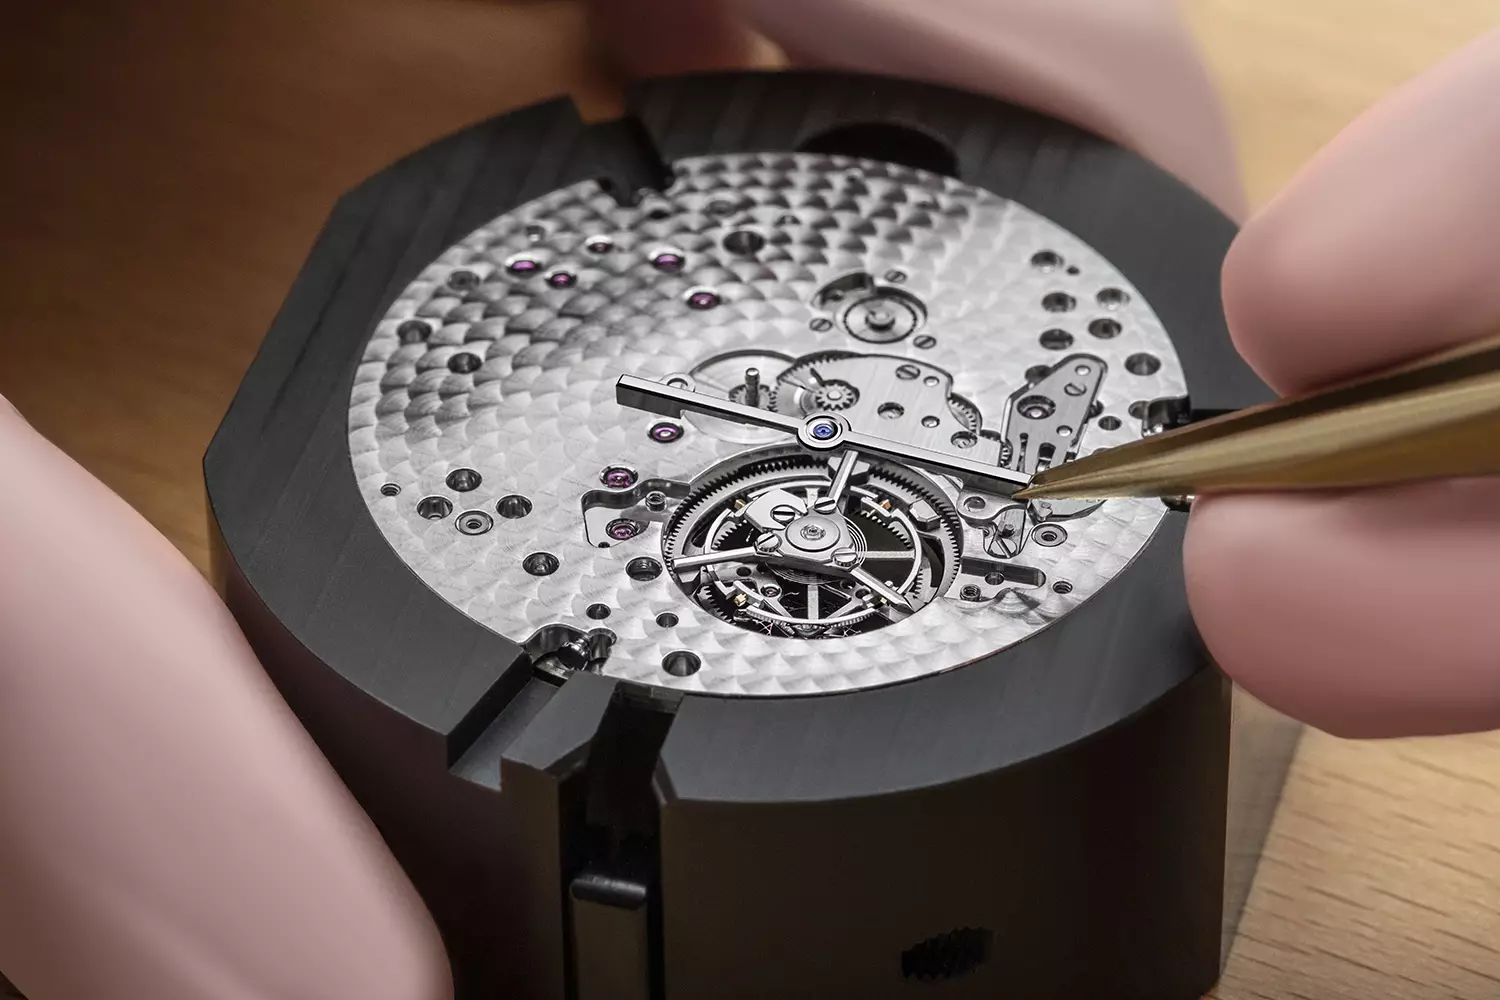 Breguet Unleashes Elegance with the Marine Tourbillon 5577 for the Modern Man